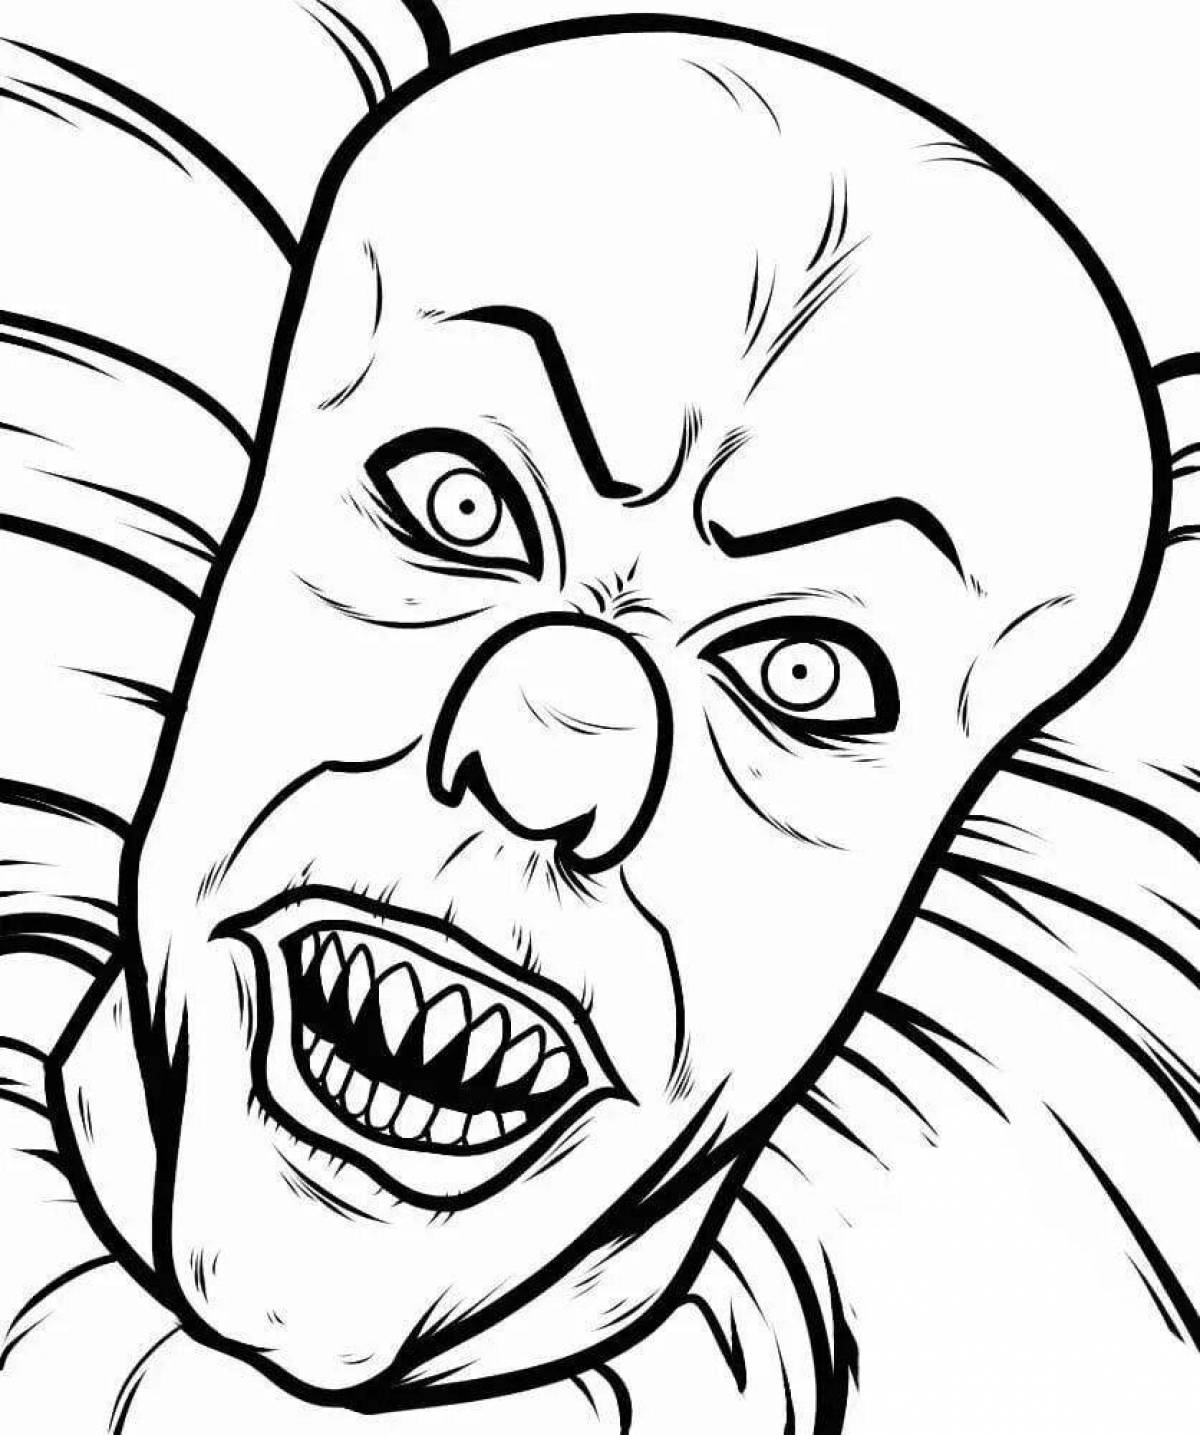 Disturbing horror coloring pages for kids